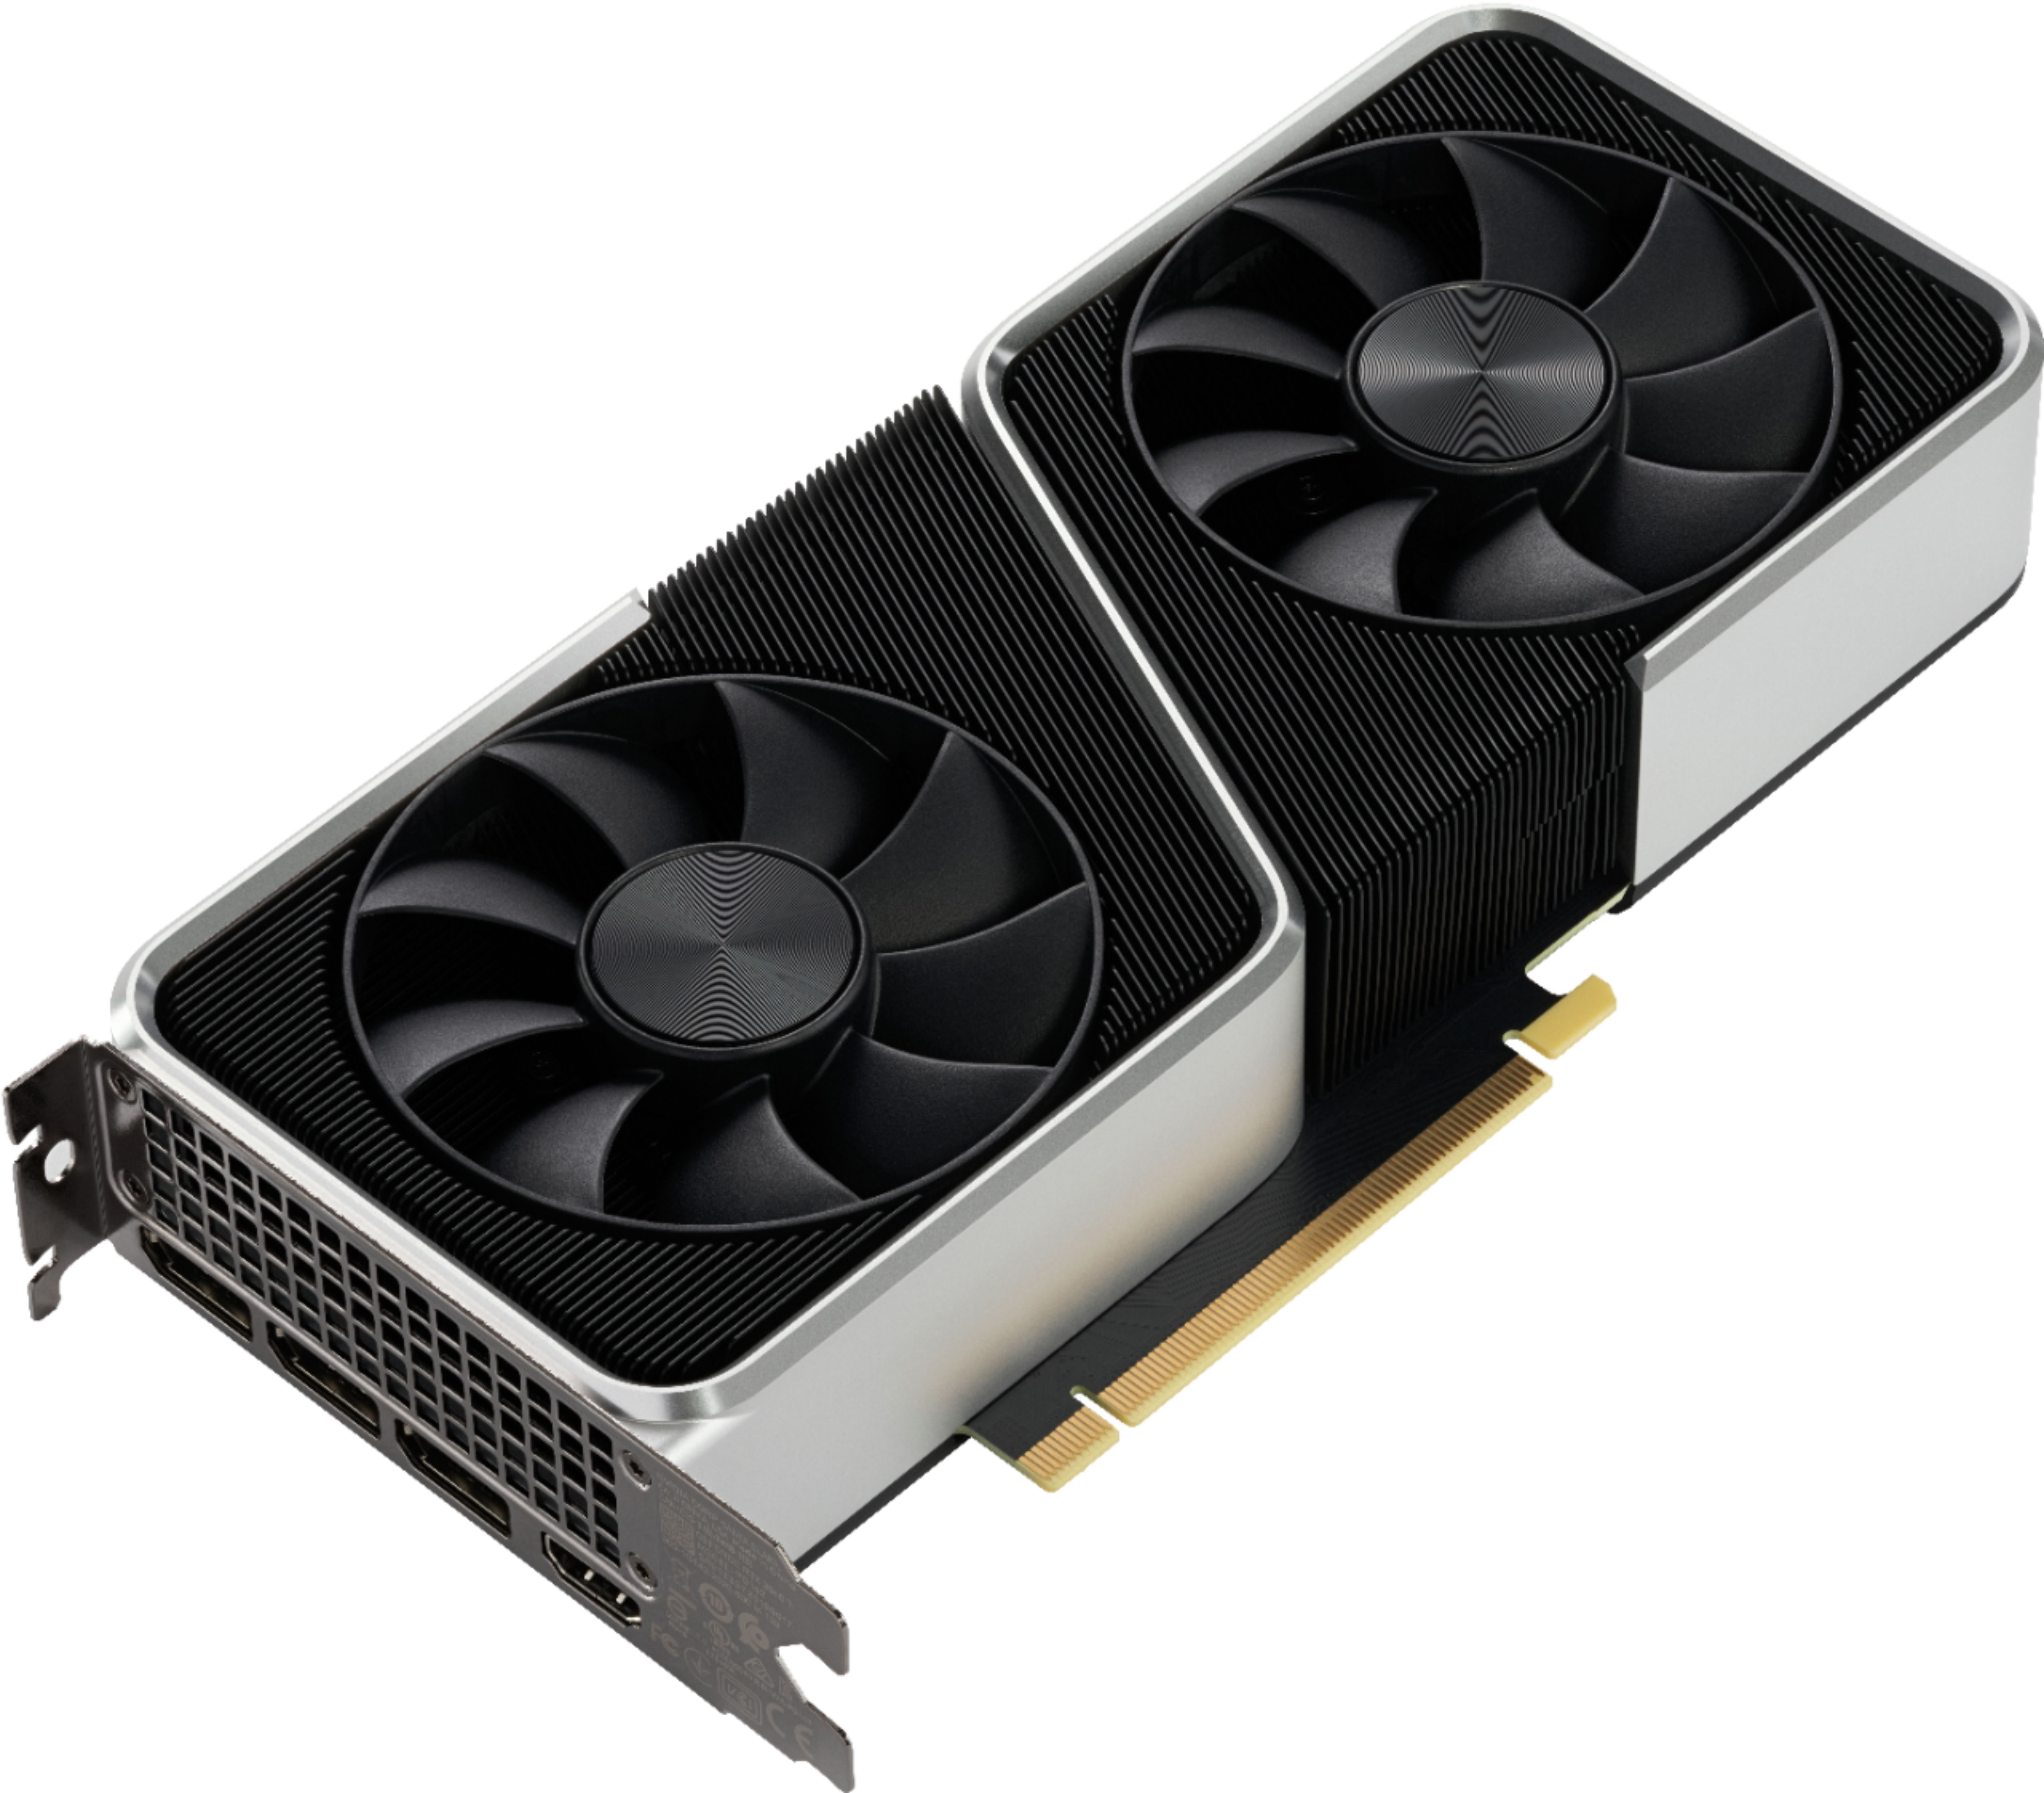 NVIDIA GeForce RTX 3060 Ti 8GB GDDR6 PCI Express 4.0 Graphics Card Steel  and Black 900-1G142-2520-000 - Best Buy